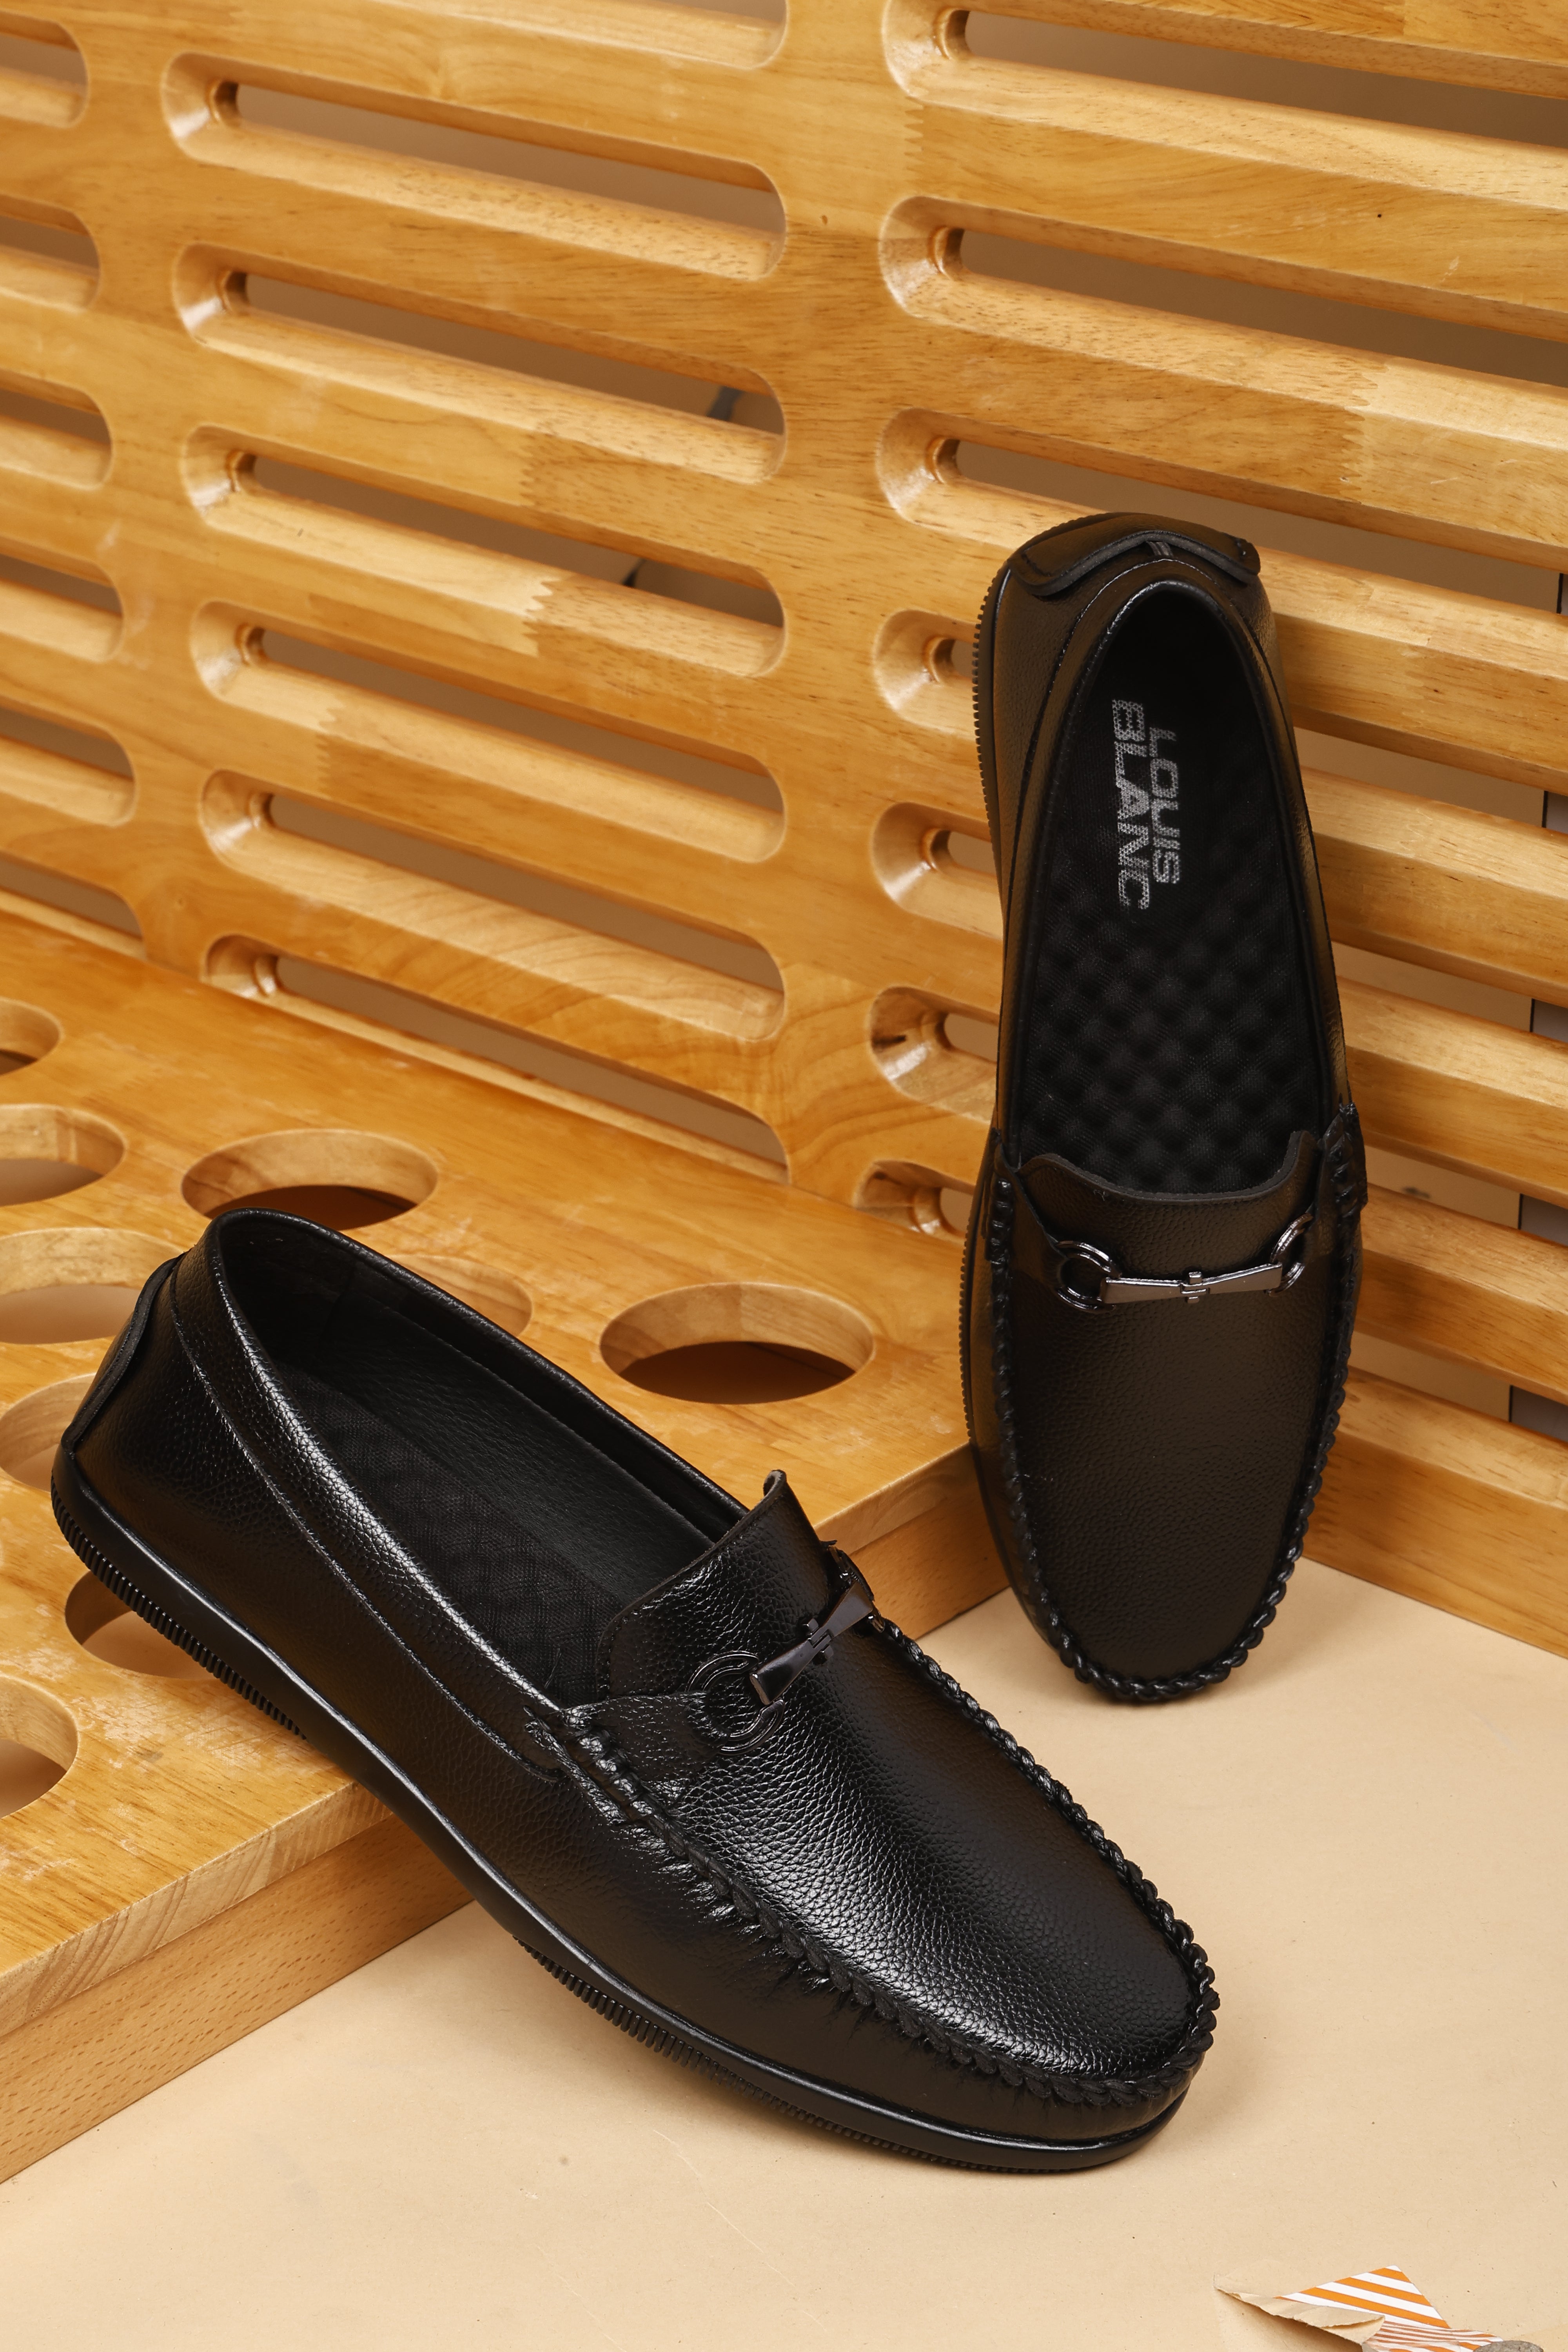 LB 40 Laredo Black Slip On Style Loafer Most Comfortable Doctor Insole With Wrinkle Free Fox Leather Loafers.